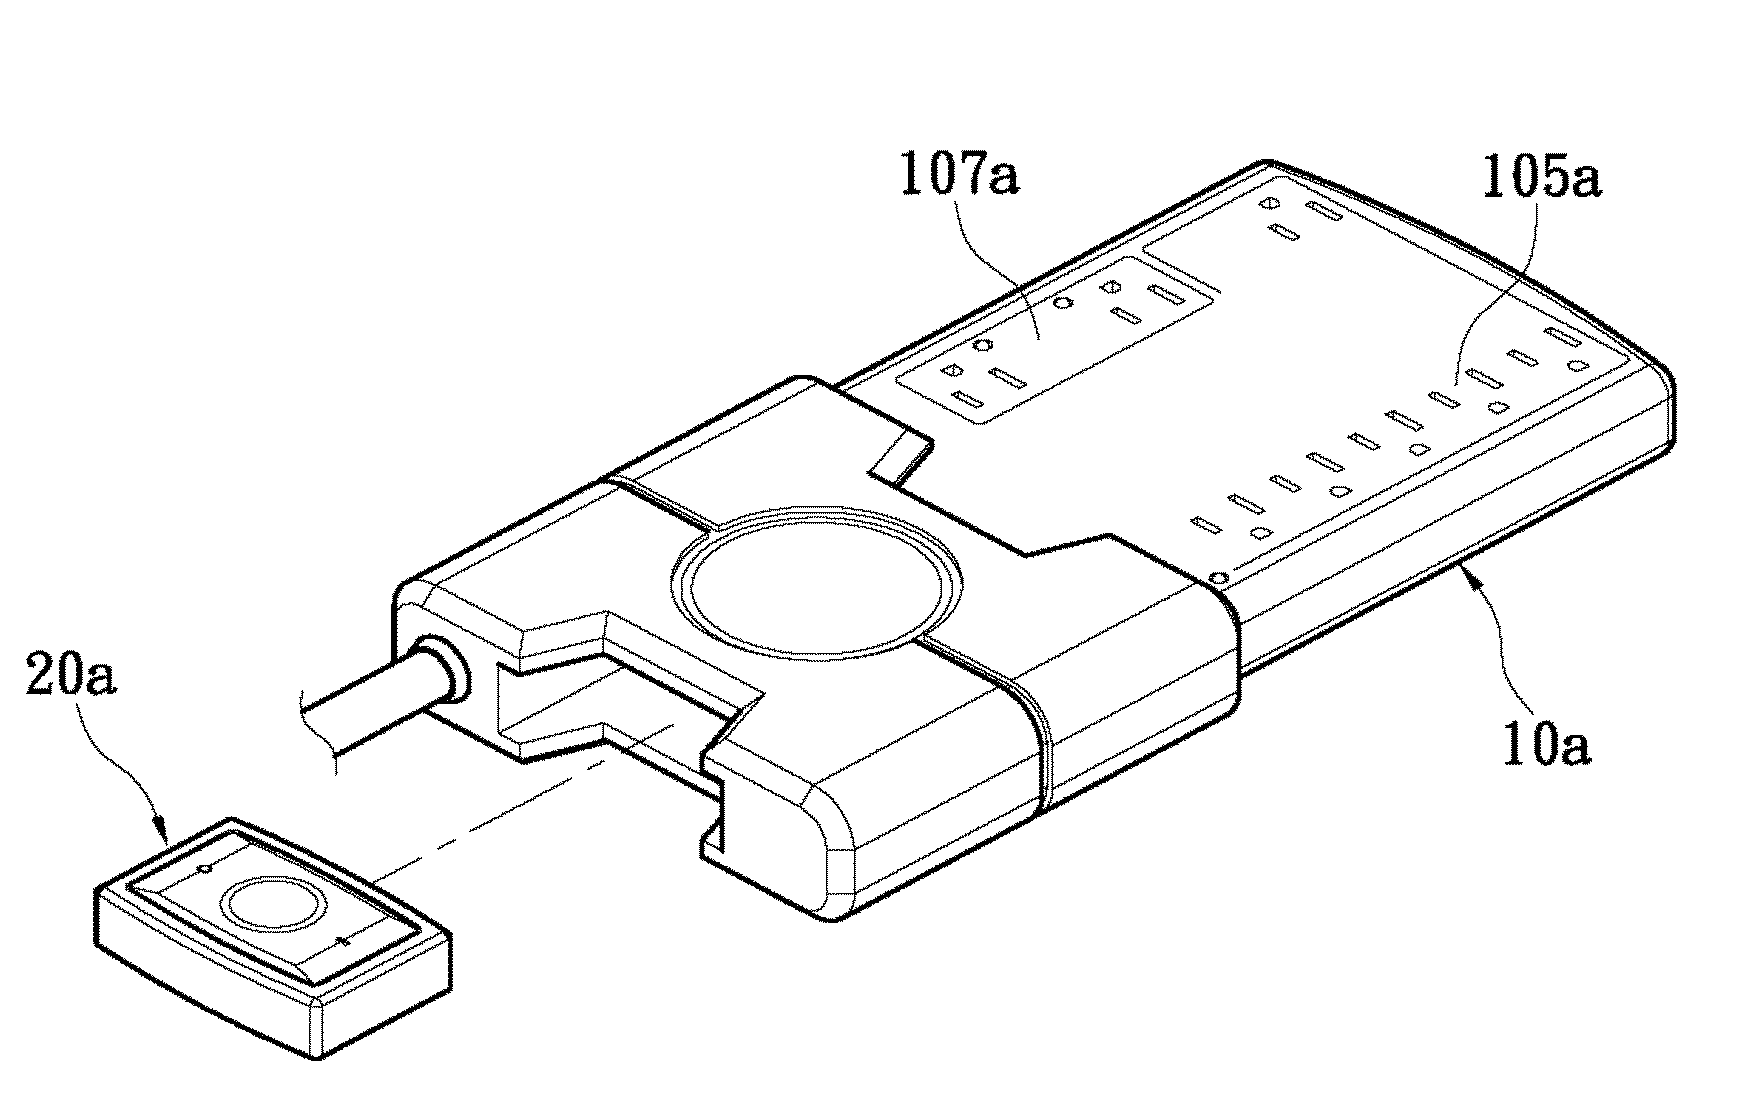 Remote controllable power outlet apparatus with grouping capability and remote control grouping method thereof